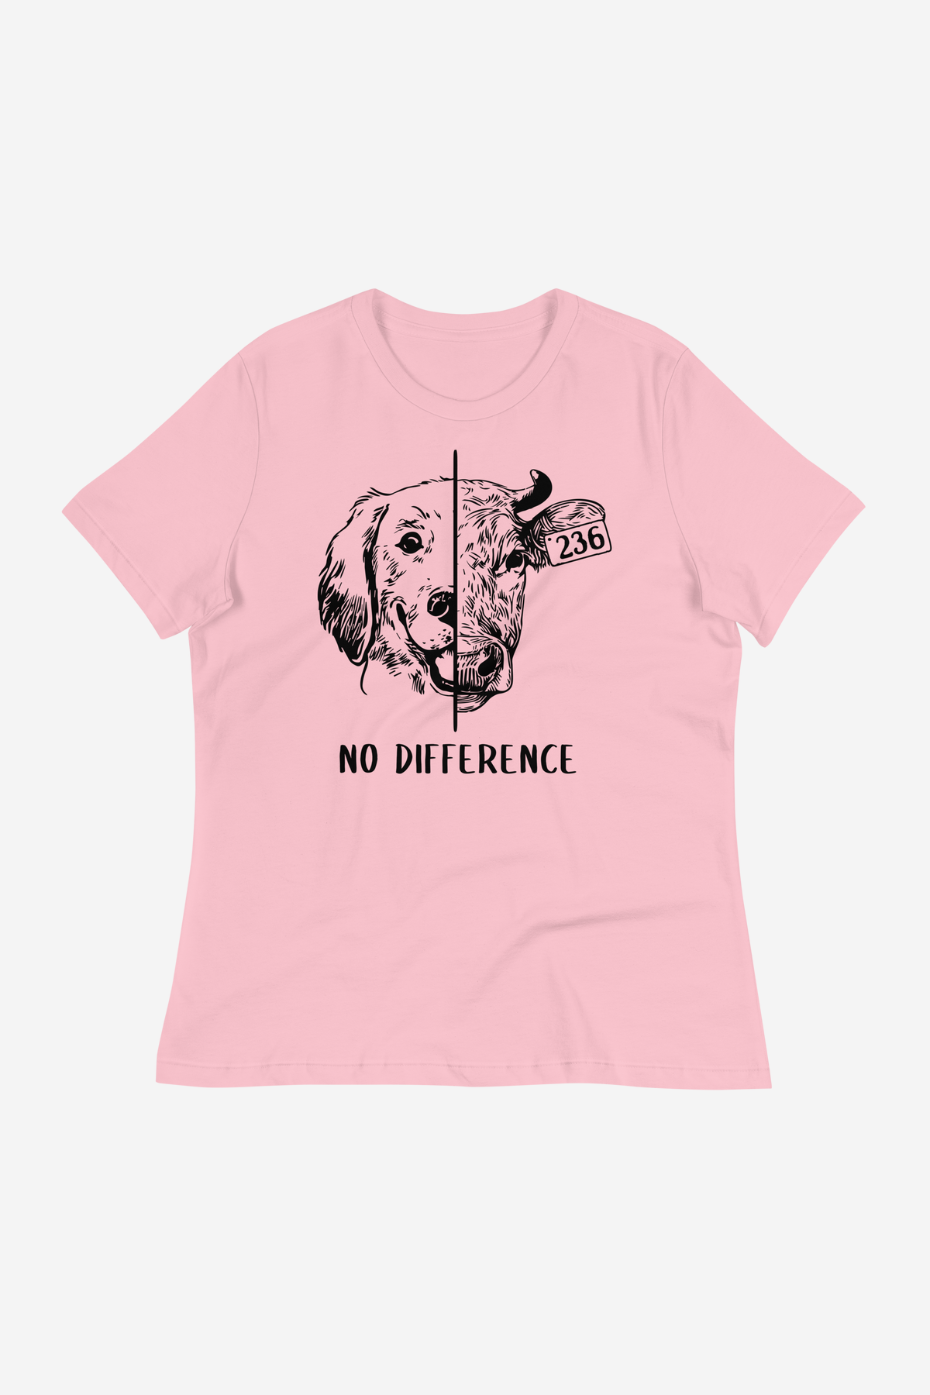 No Difference Women's Relaxed T-Shirt